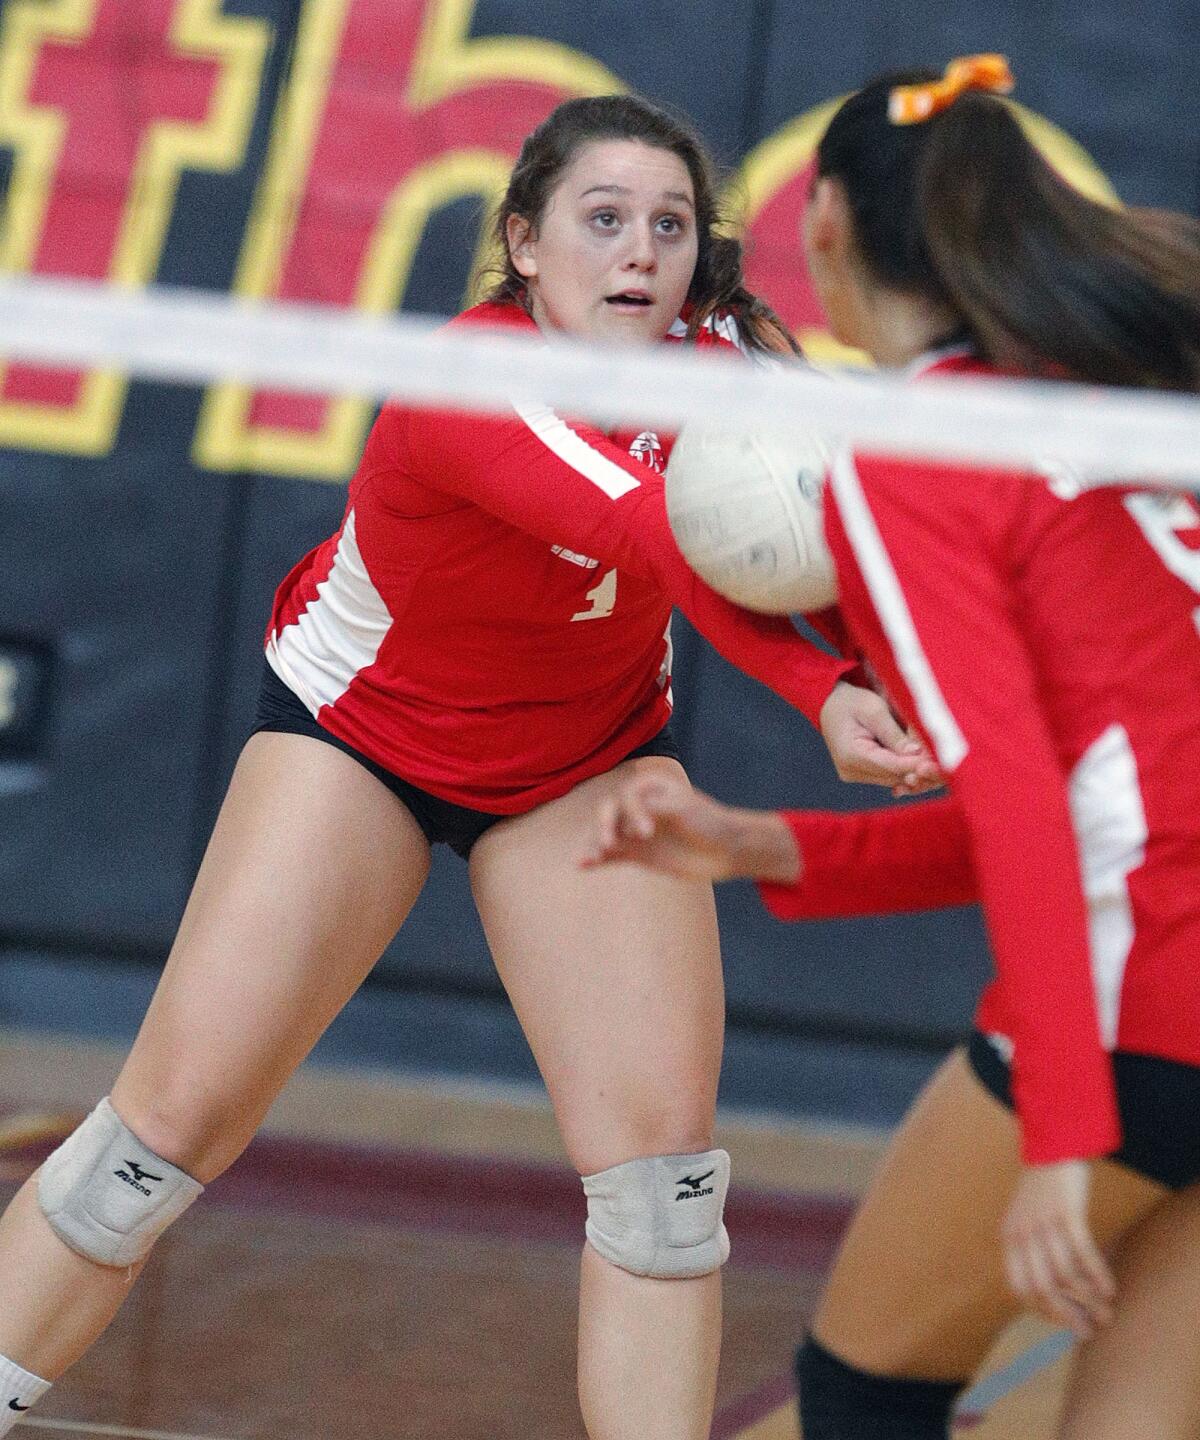 Burroughs' Lily Rogers digs an Arcadia serve into play in a Pacific League girls' volleyball match at Arcadia High School on Thursday, September 19, 2019. (Tim Berger / Staff Photographer)